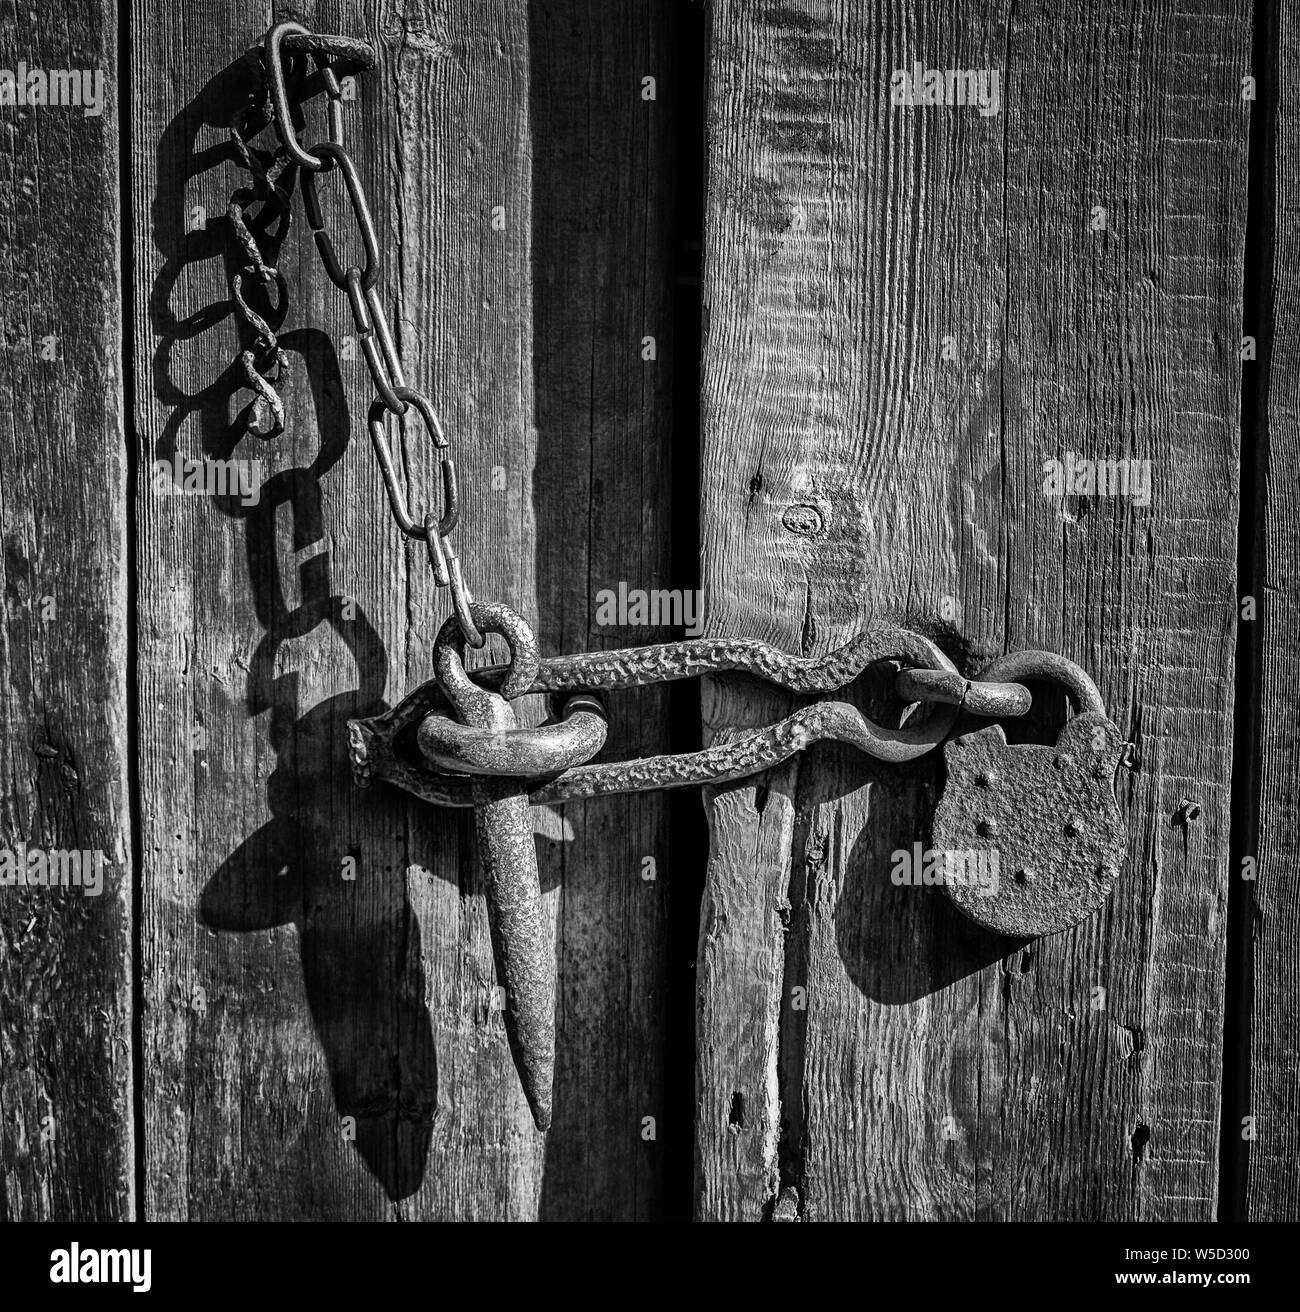 Forged, rusty hasp and padlock on a rustic barn door Stock Photo